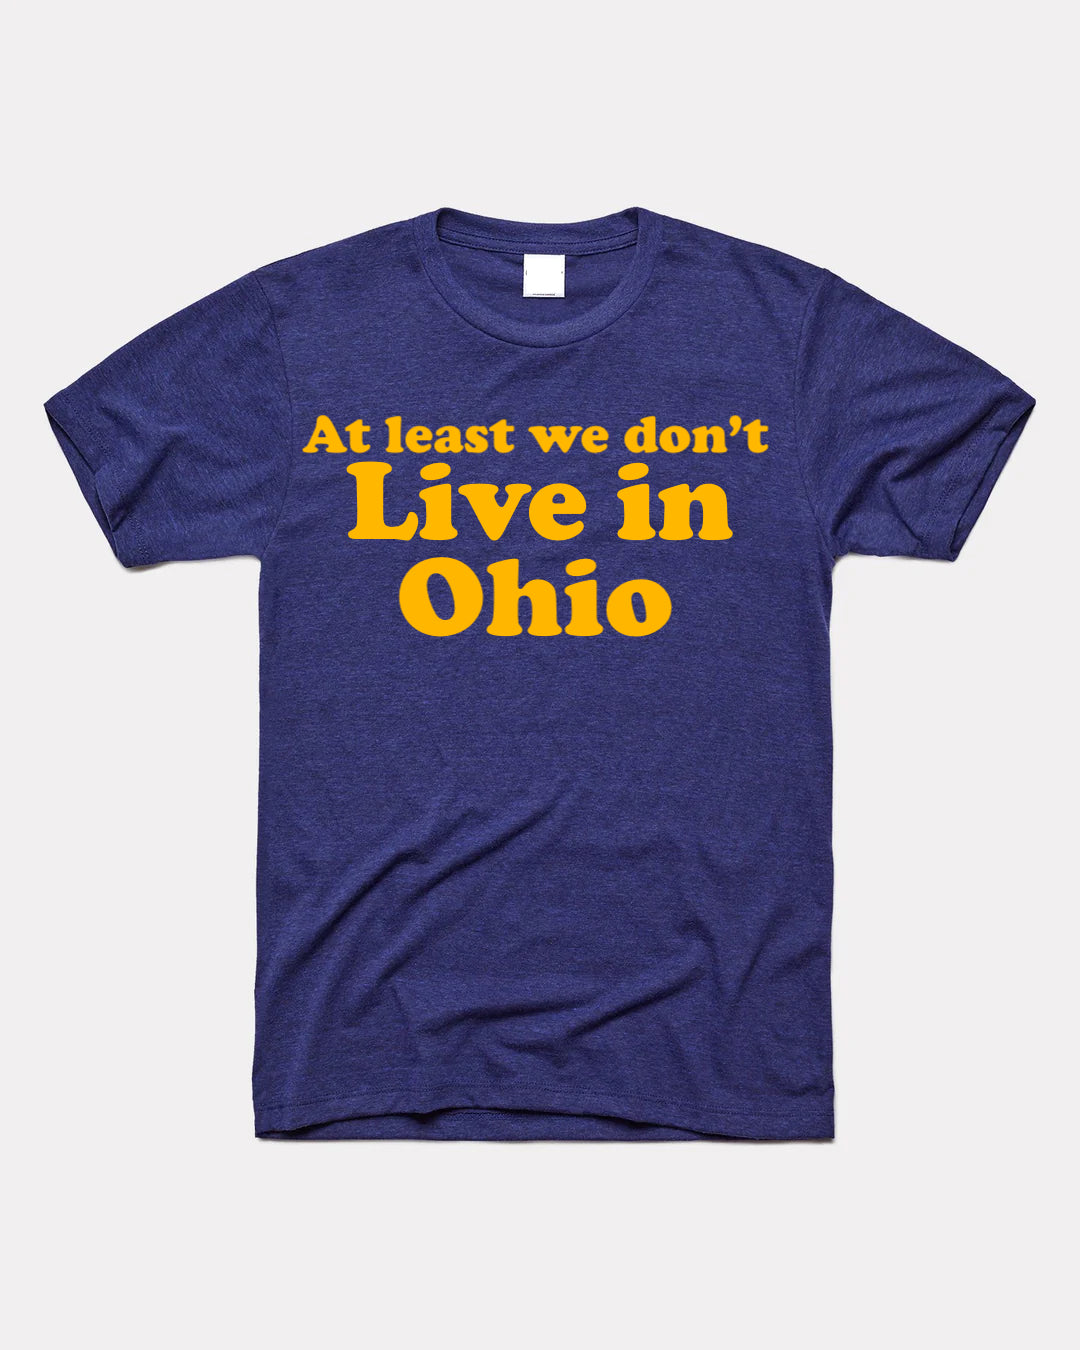 At least we ……..Maize & Blue